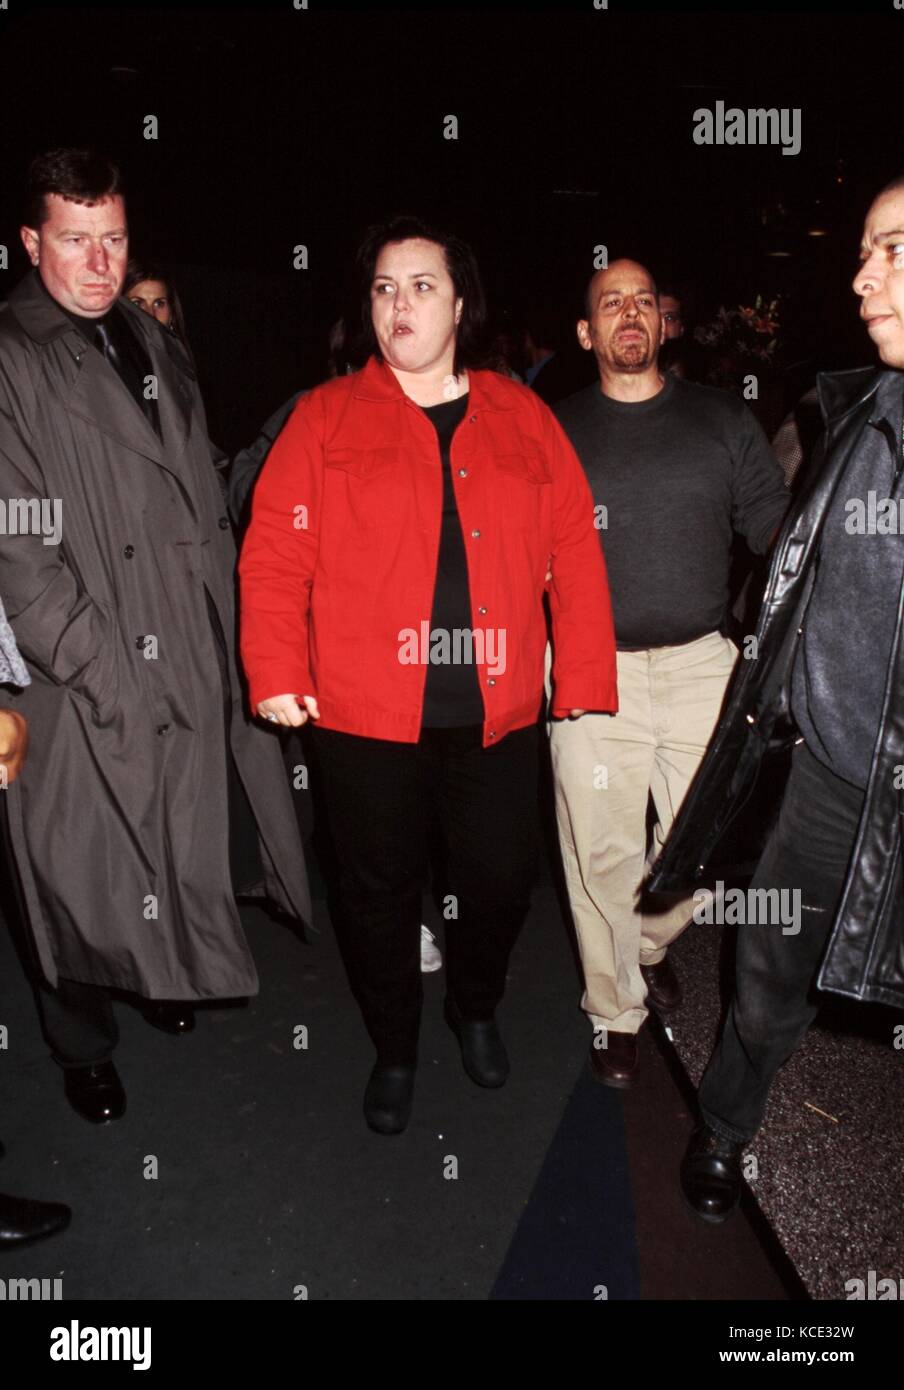 Rosie O'Donnell and bodyguards Tribute to Madeline Kahn Carolines On Broadway, NYC 2 / 25 / 02 © JOSEPH MARZULLO / MediaPunch Stock Photo